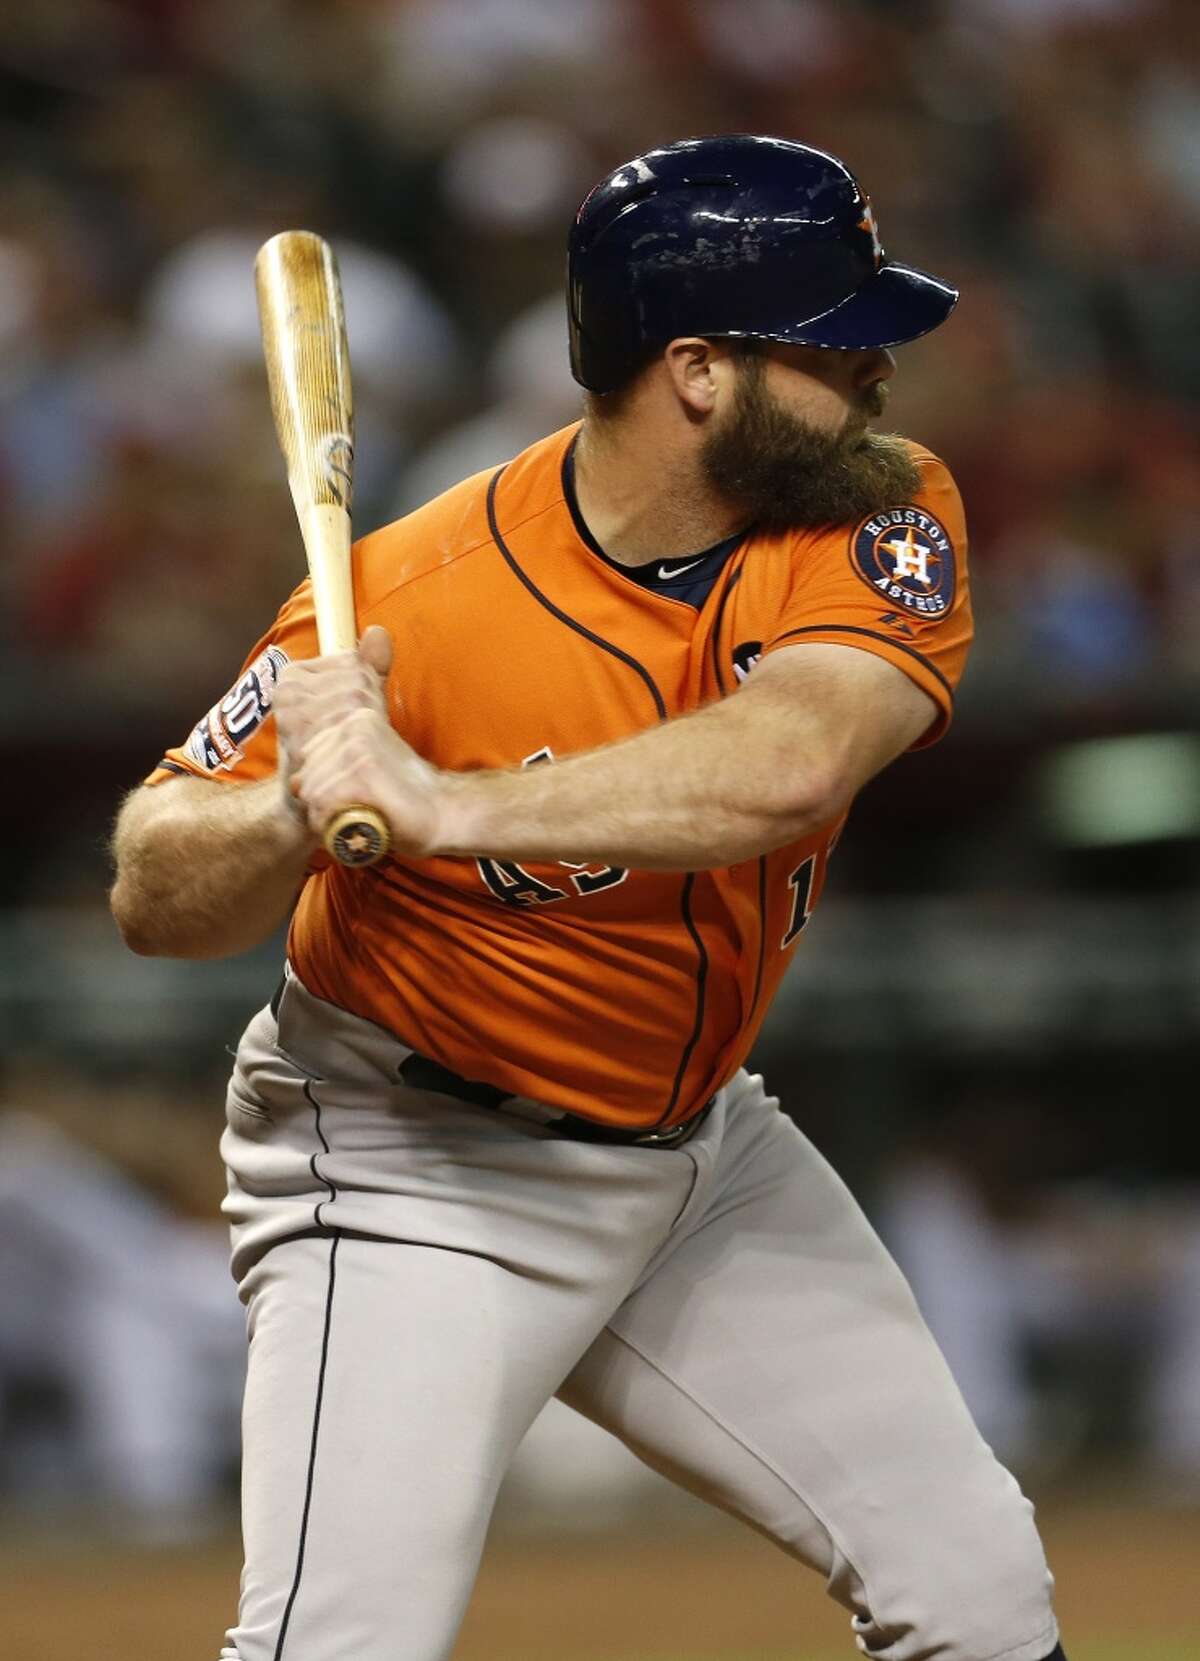 Houston Astros designated hitter Evan Gattis (11) at bat during the eighth inning of an MLB game at Chase Field on Saturday, Oct. 3, 2015. ( Karen Warren / Houston Chronicle )